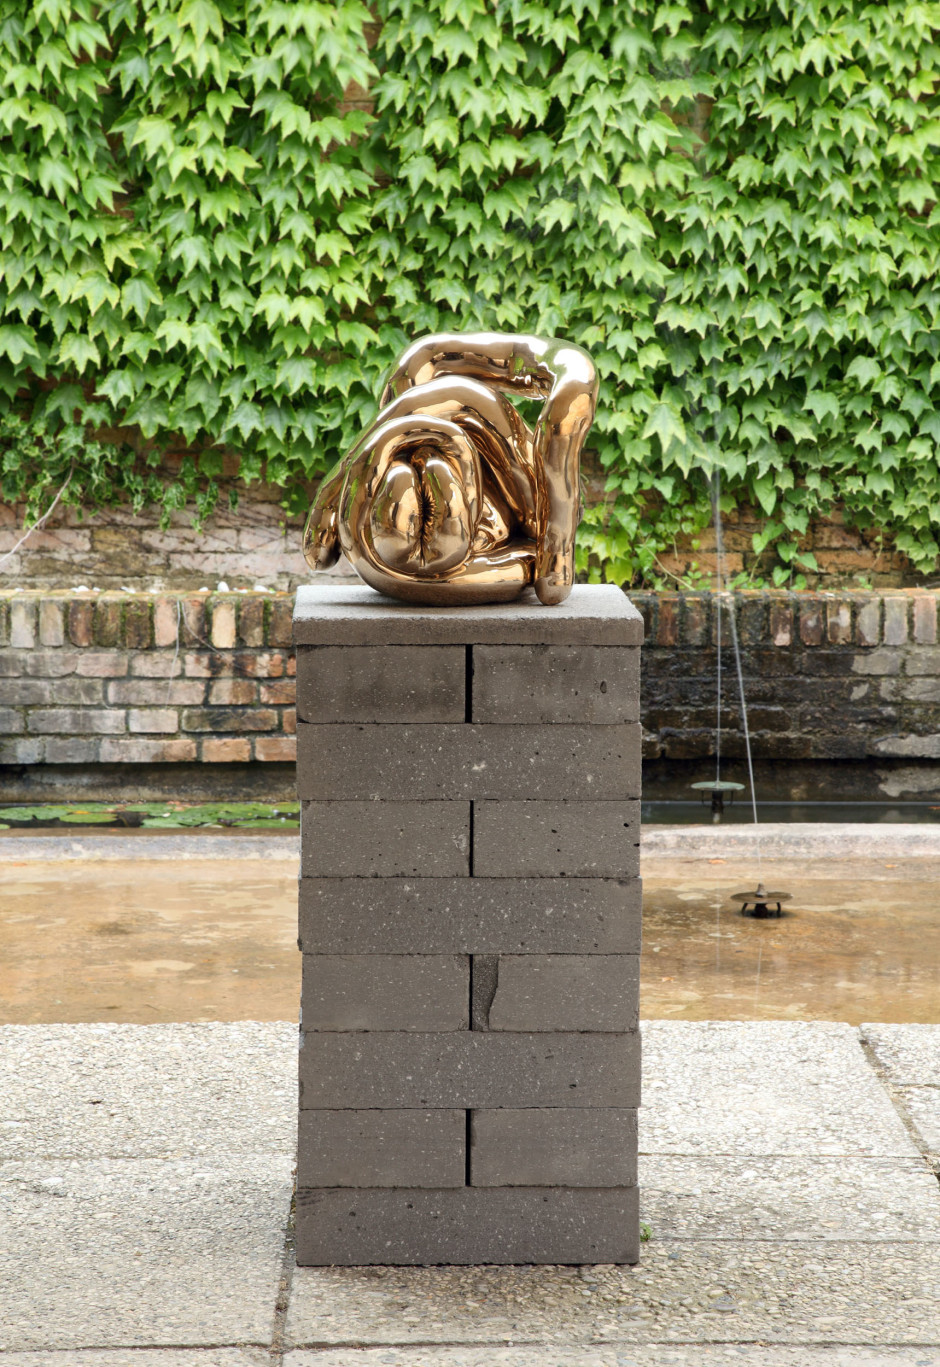 Nduda, 2013  stamped with engraved signature and editioned on base  cast bronze  36.0 x 36.0 x 33.0 cm 14 1/16 x 14 1/16 x 12 3/8 in.